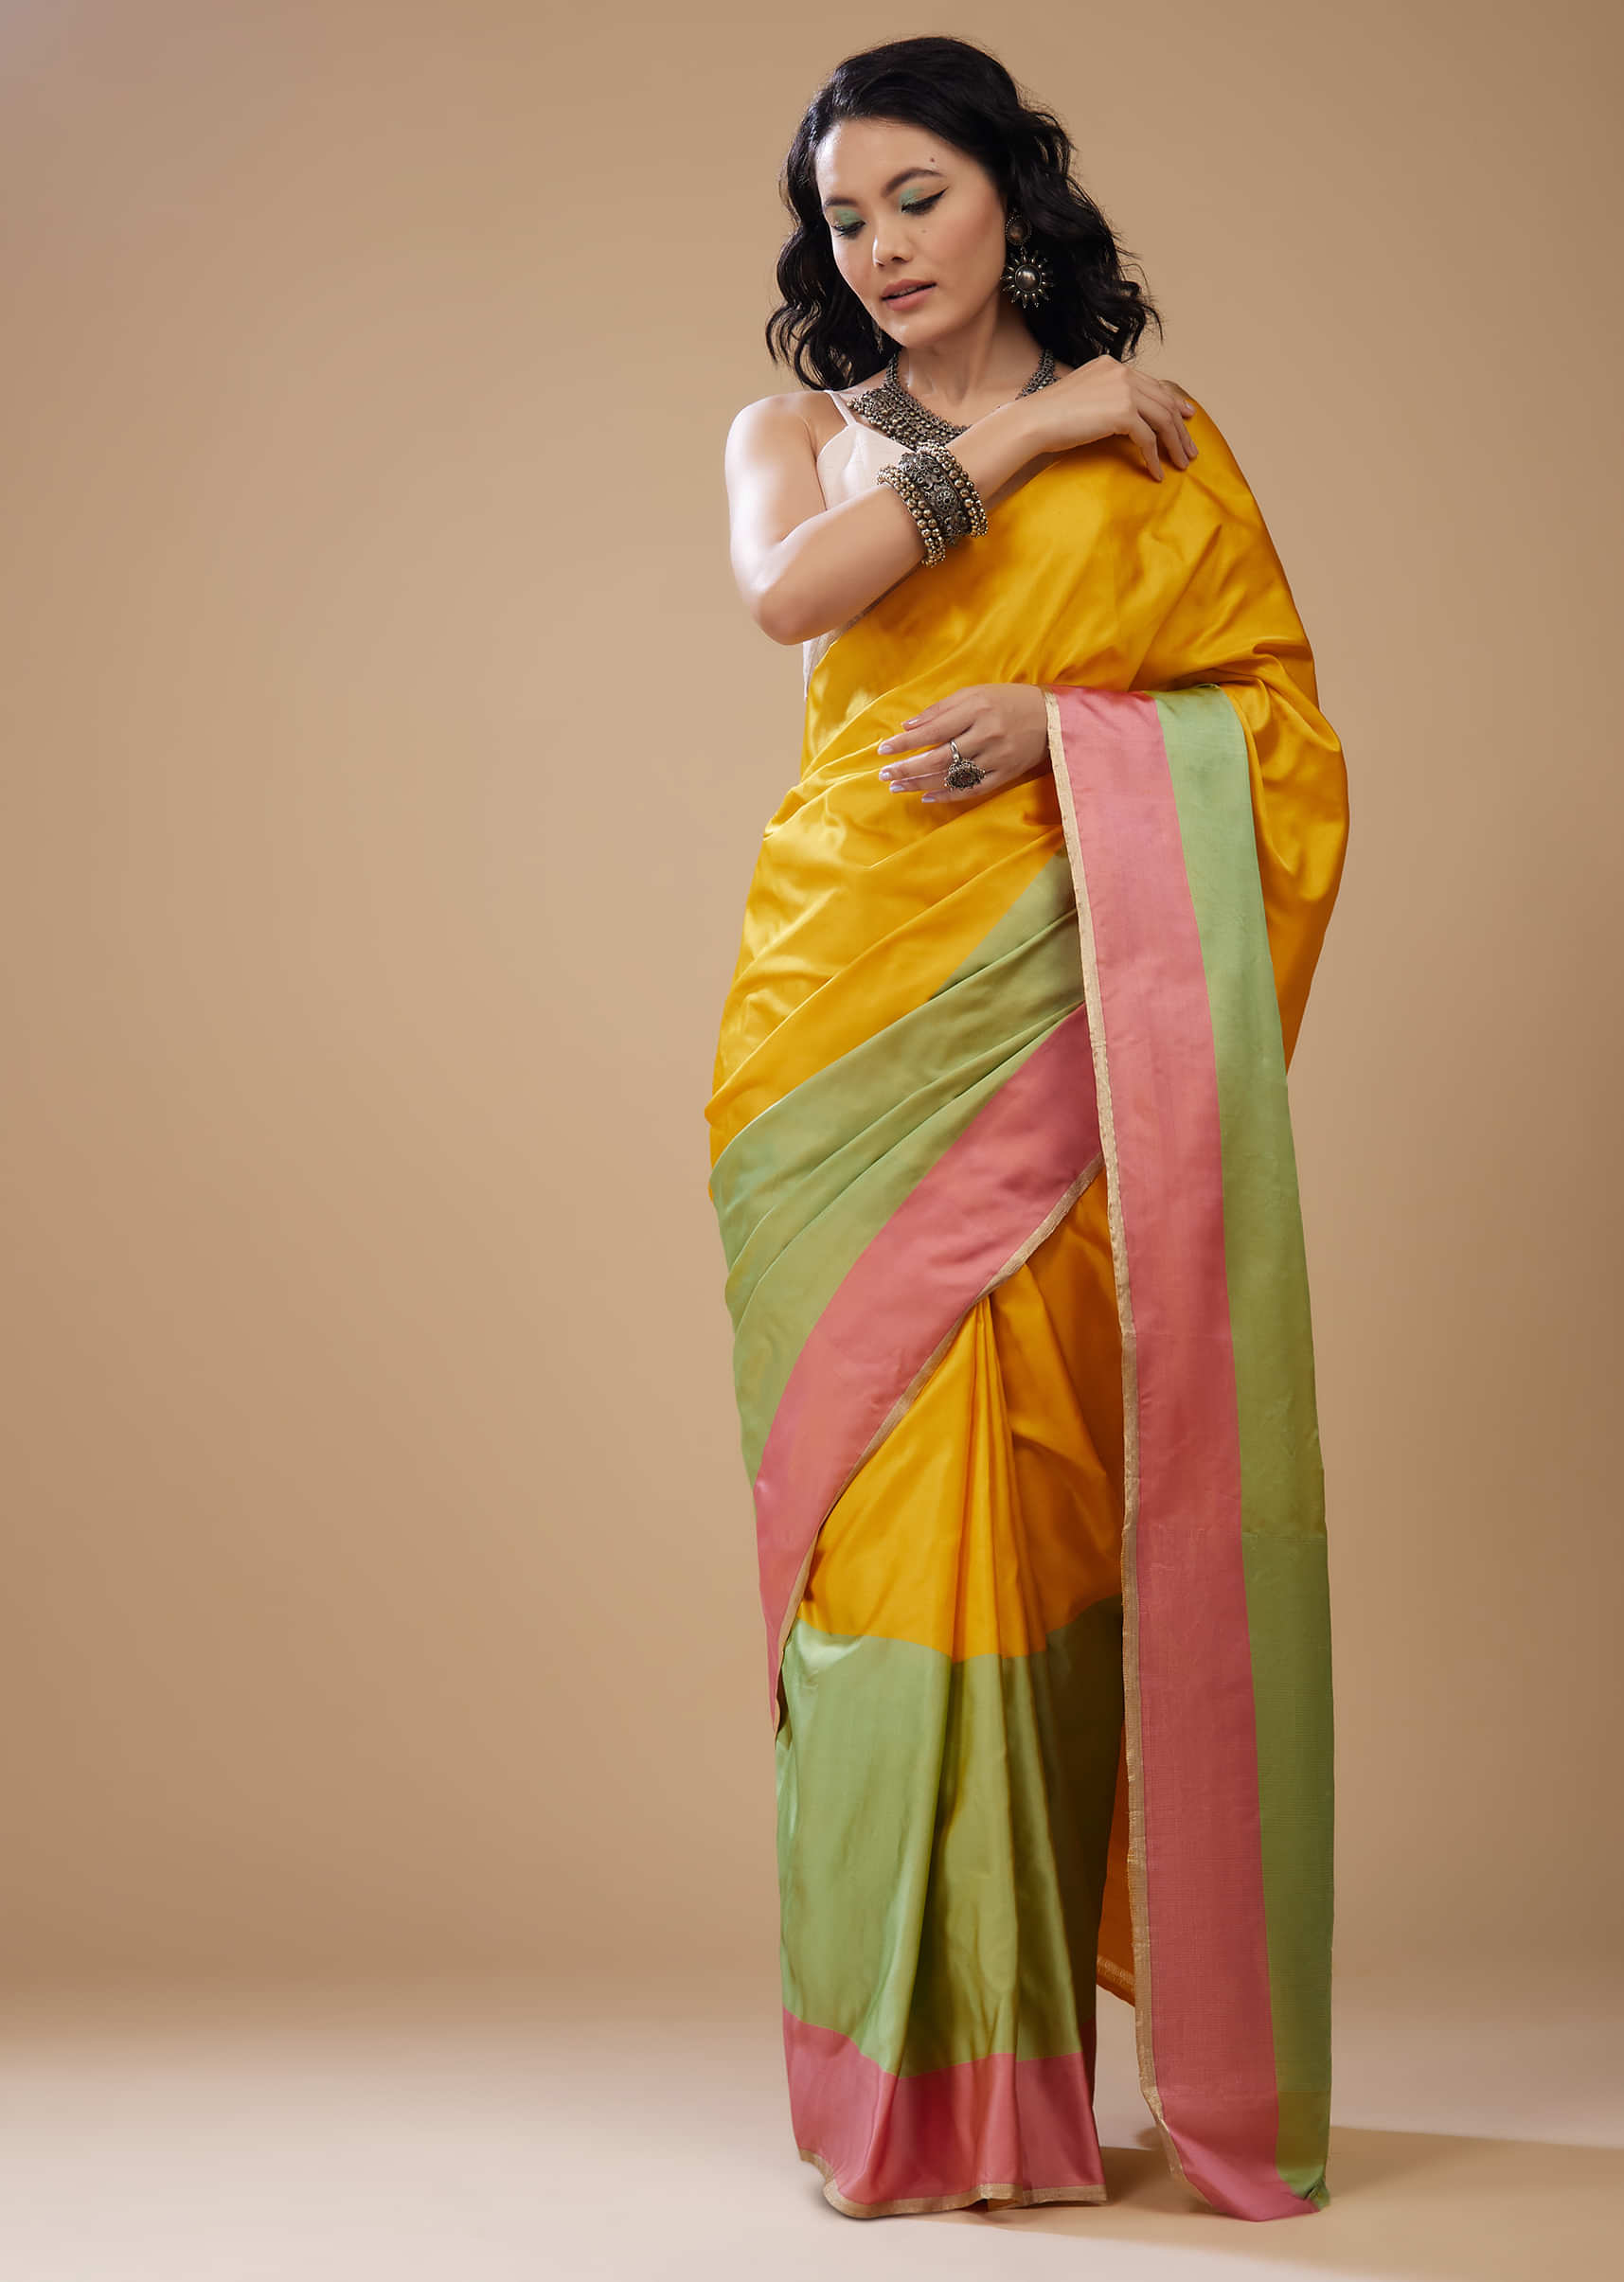 Off-White Color Organza Base Half And Half Saree With Mirror Work Blouse